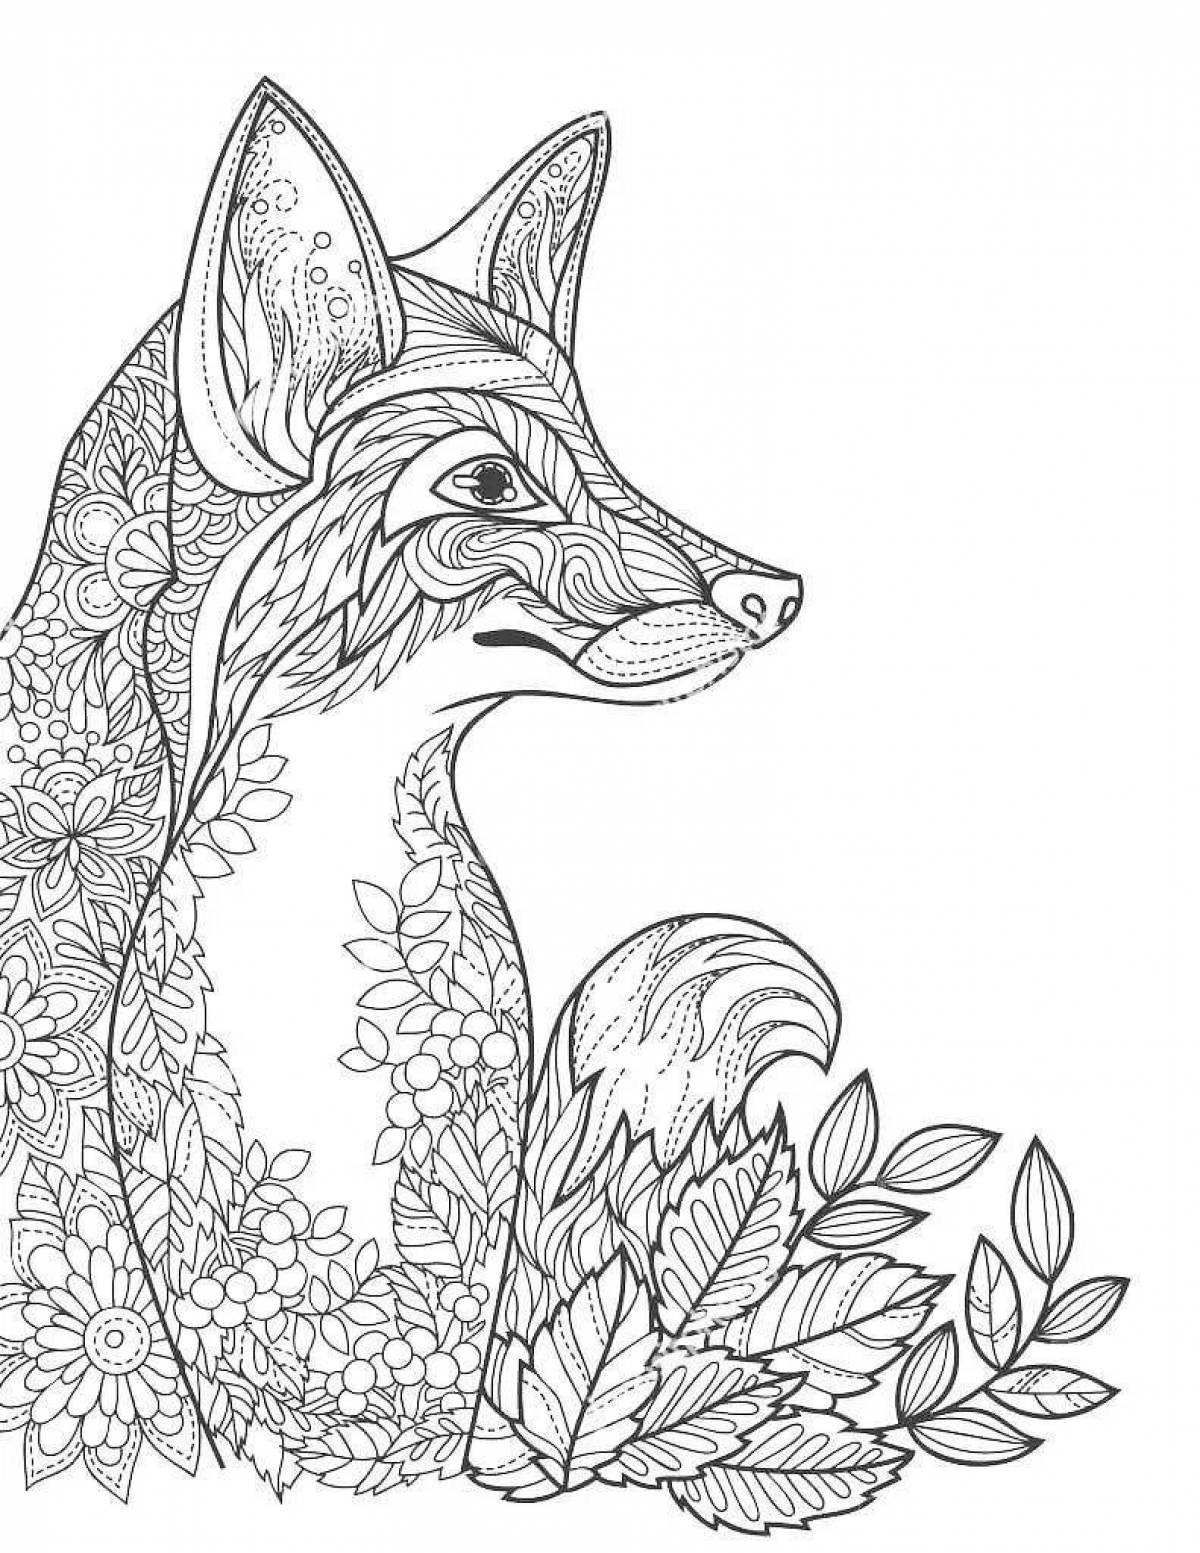 Animated fox coloring book for adults